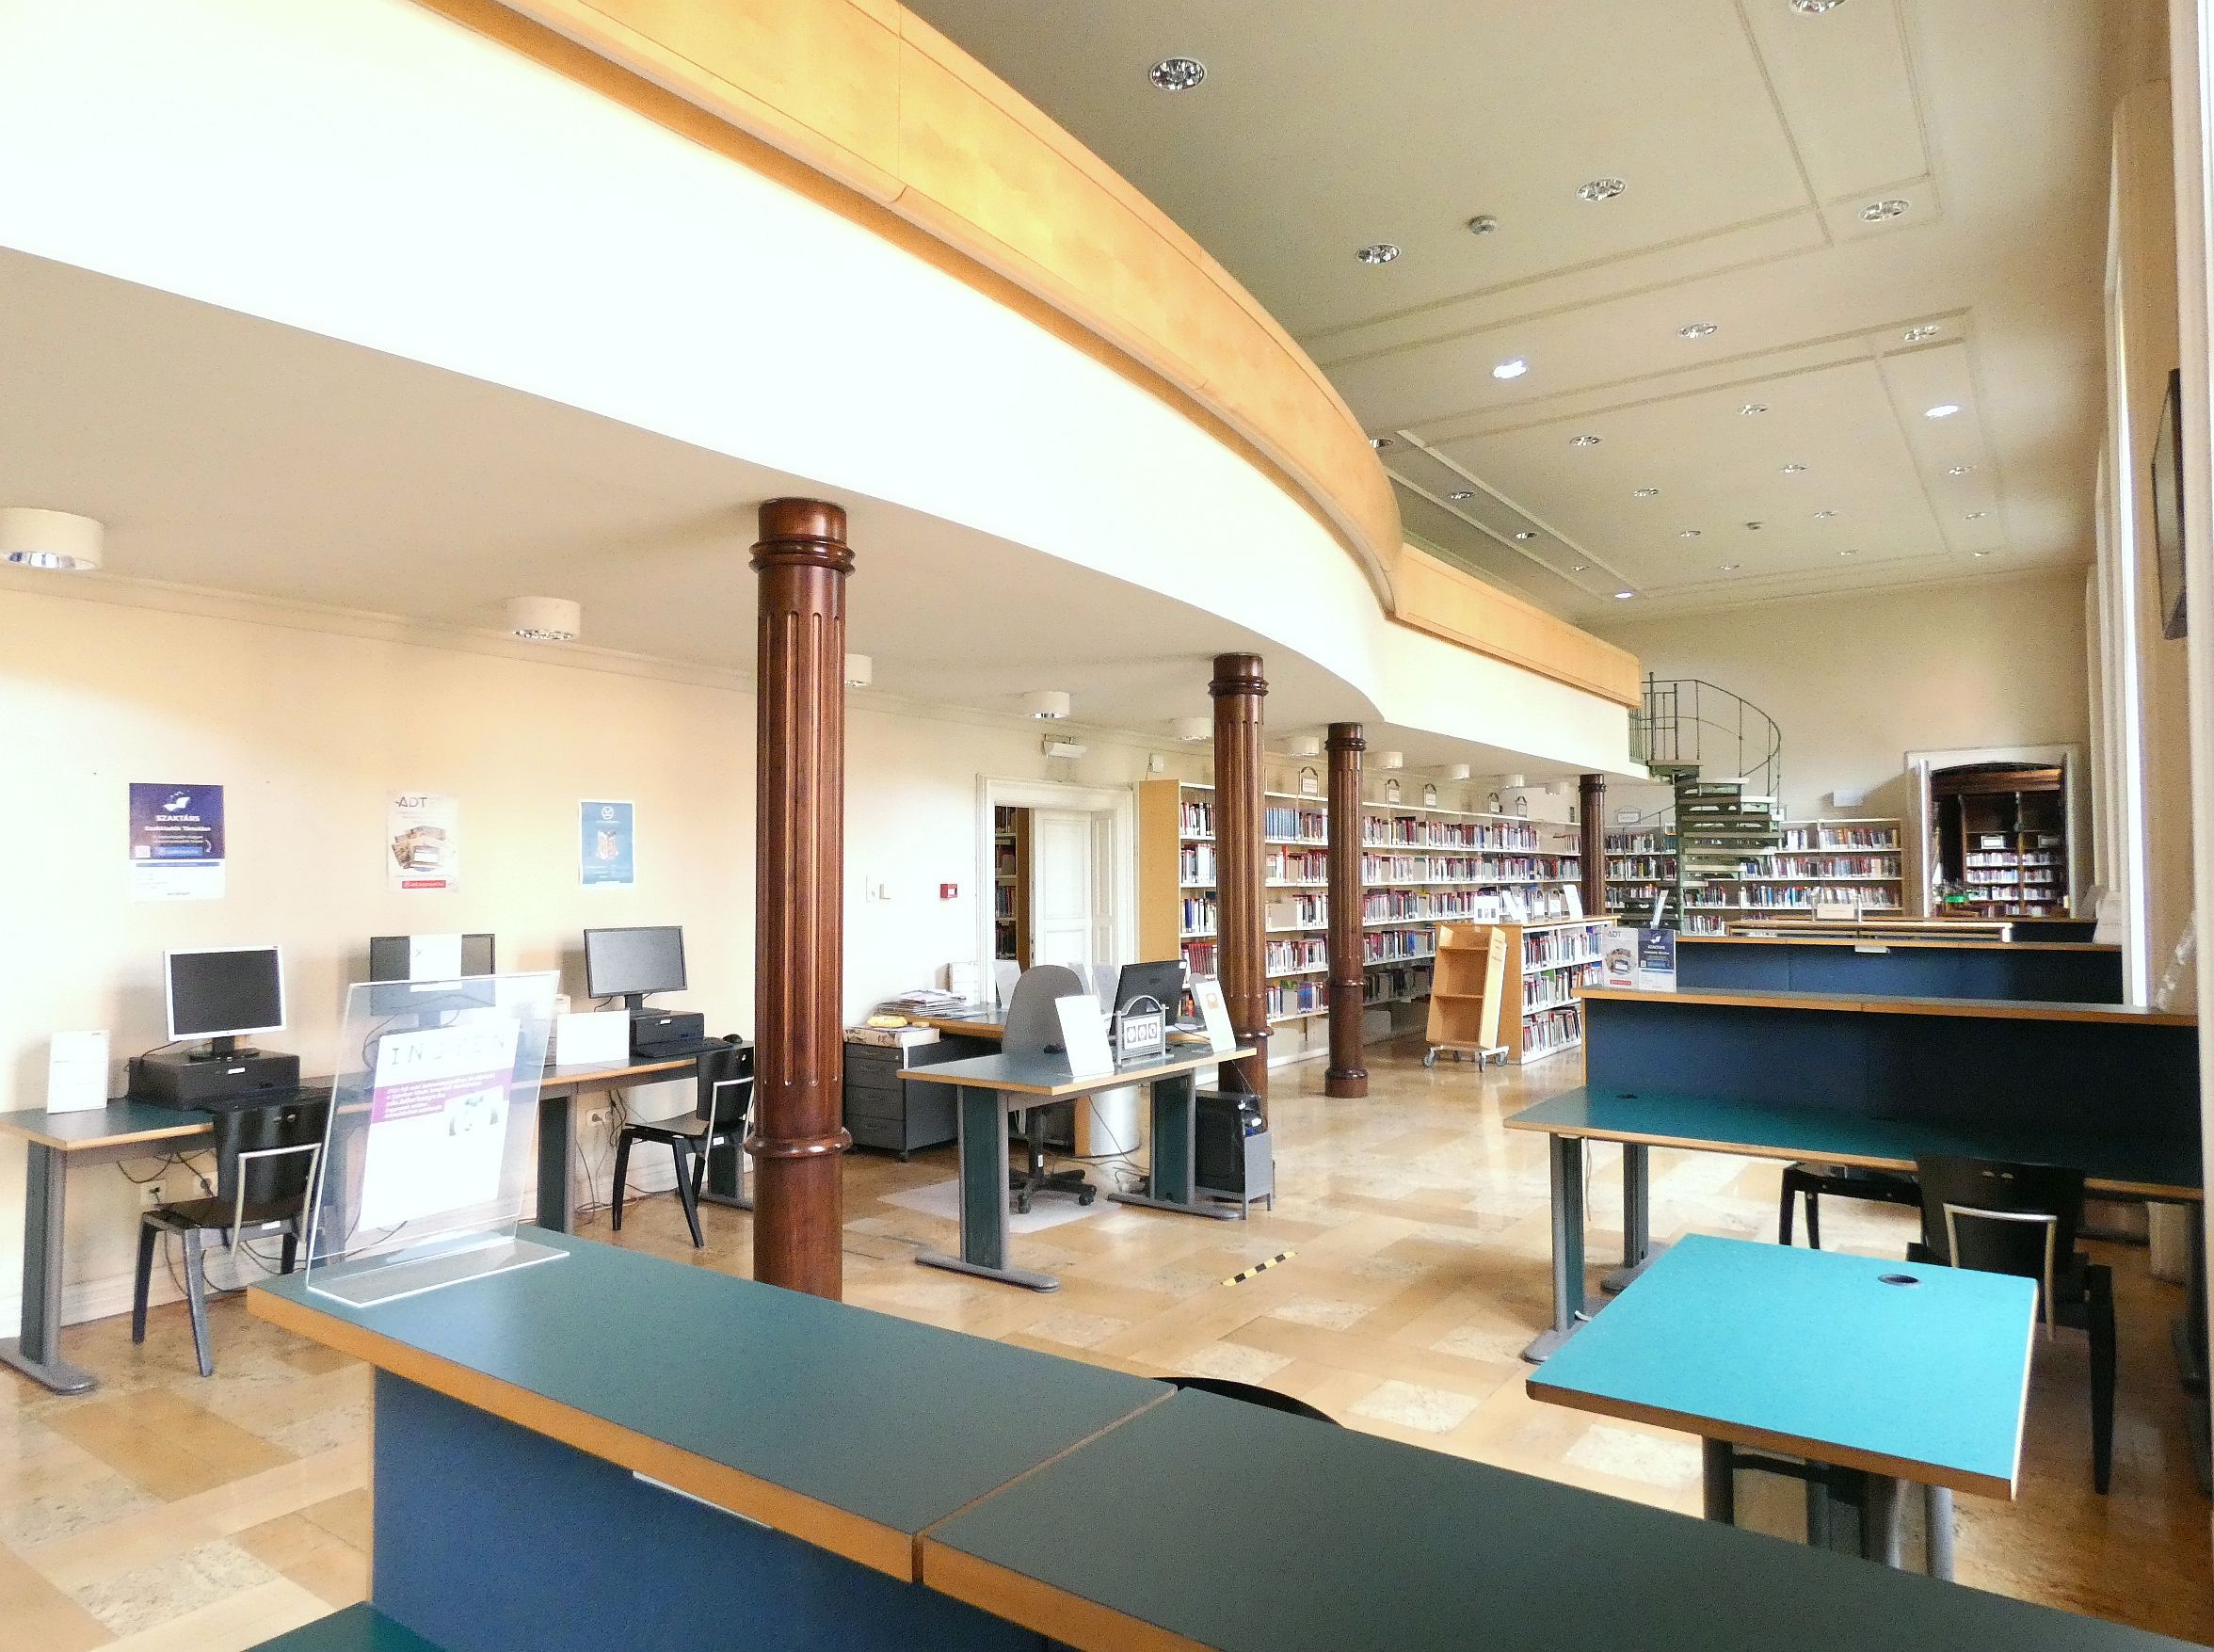 Photo of the Sociology Reading Room